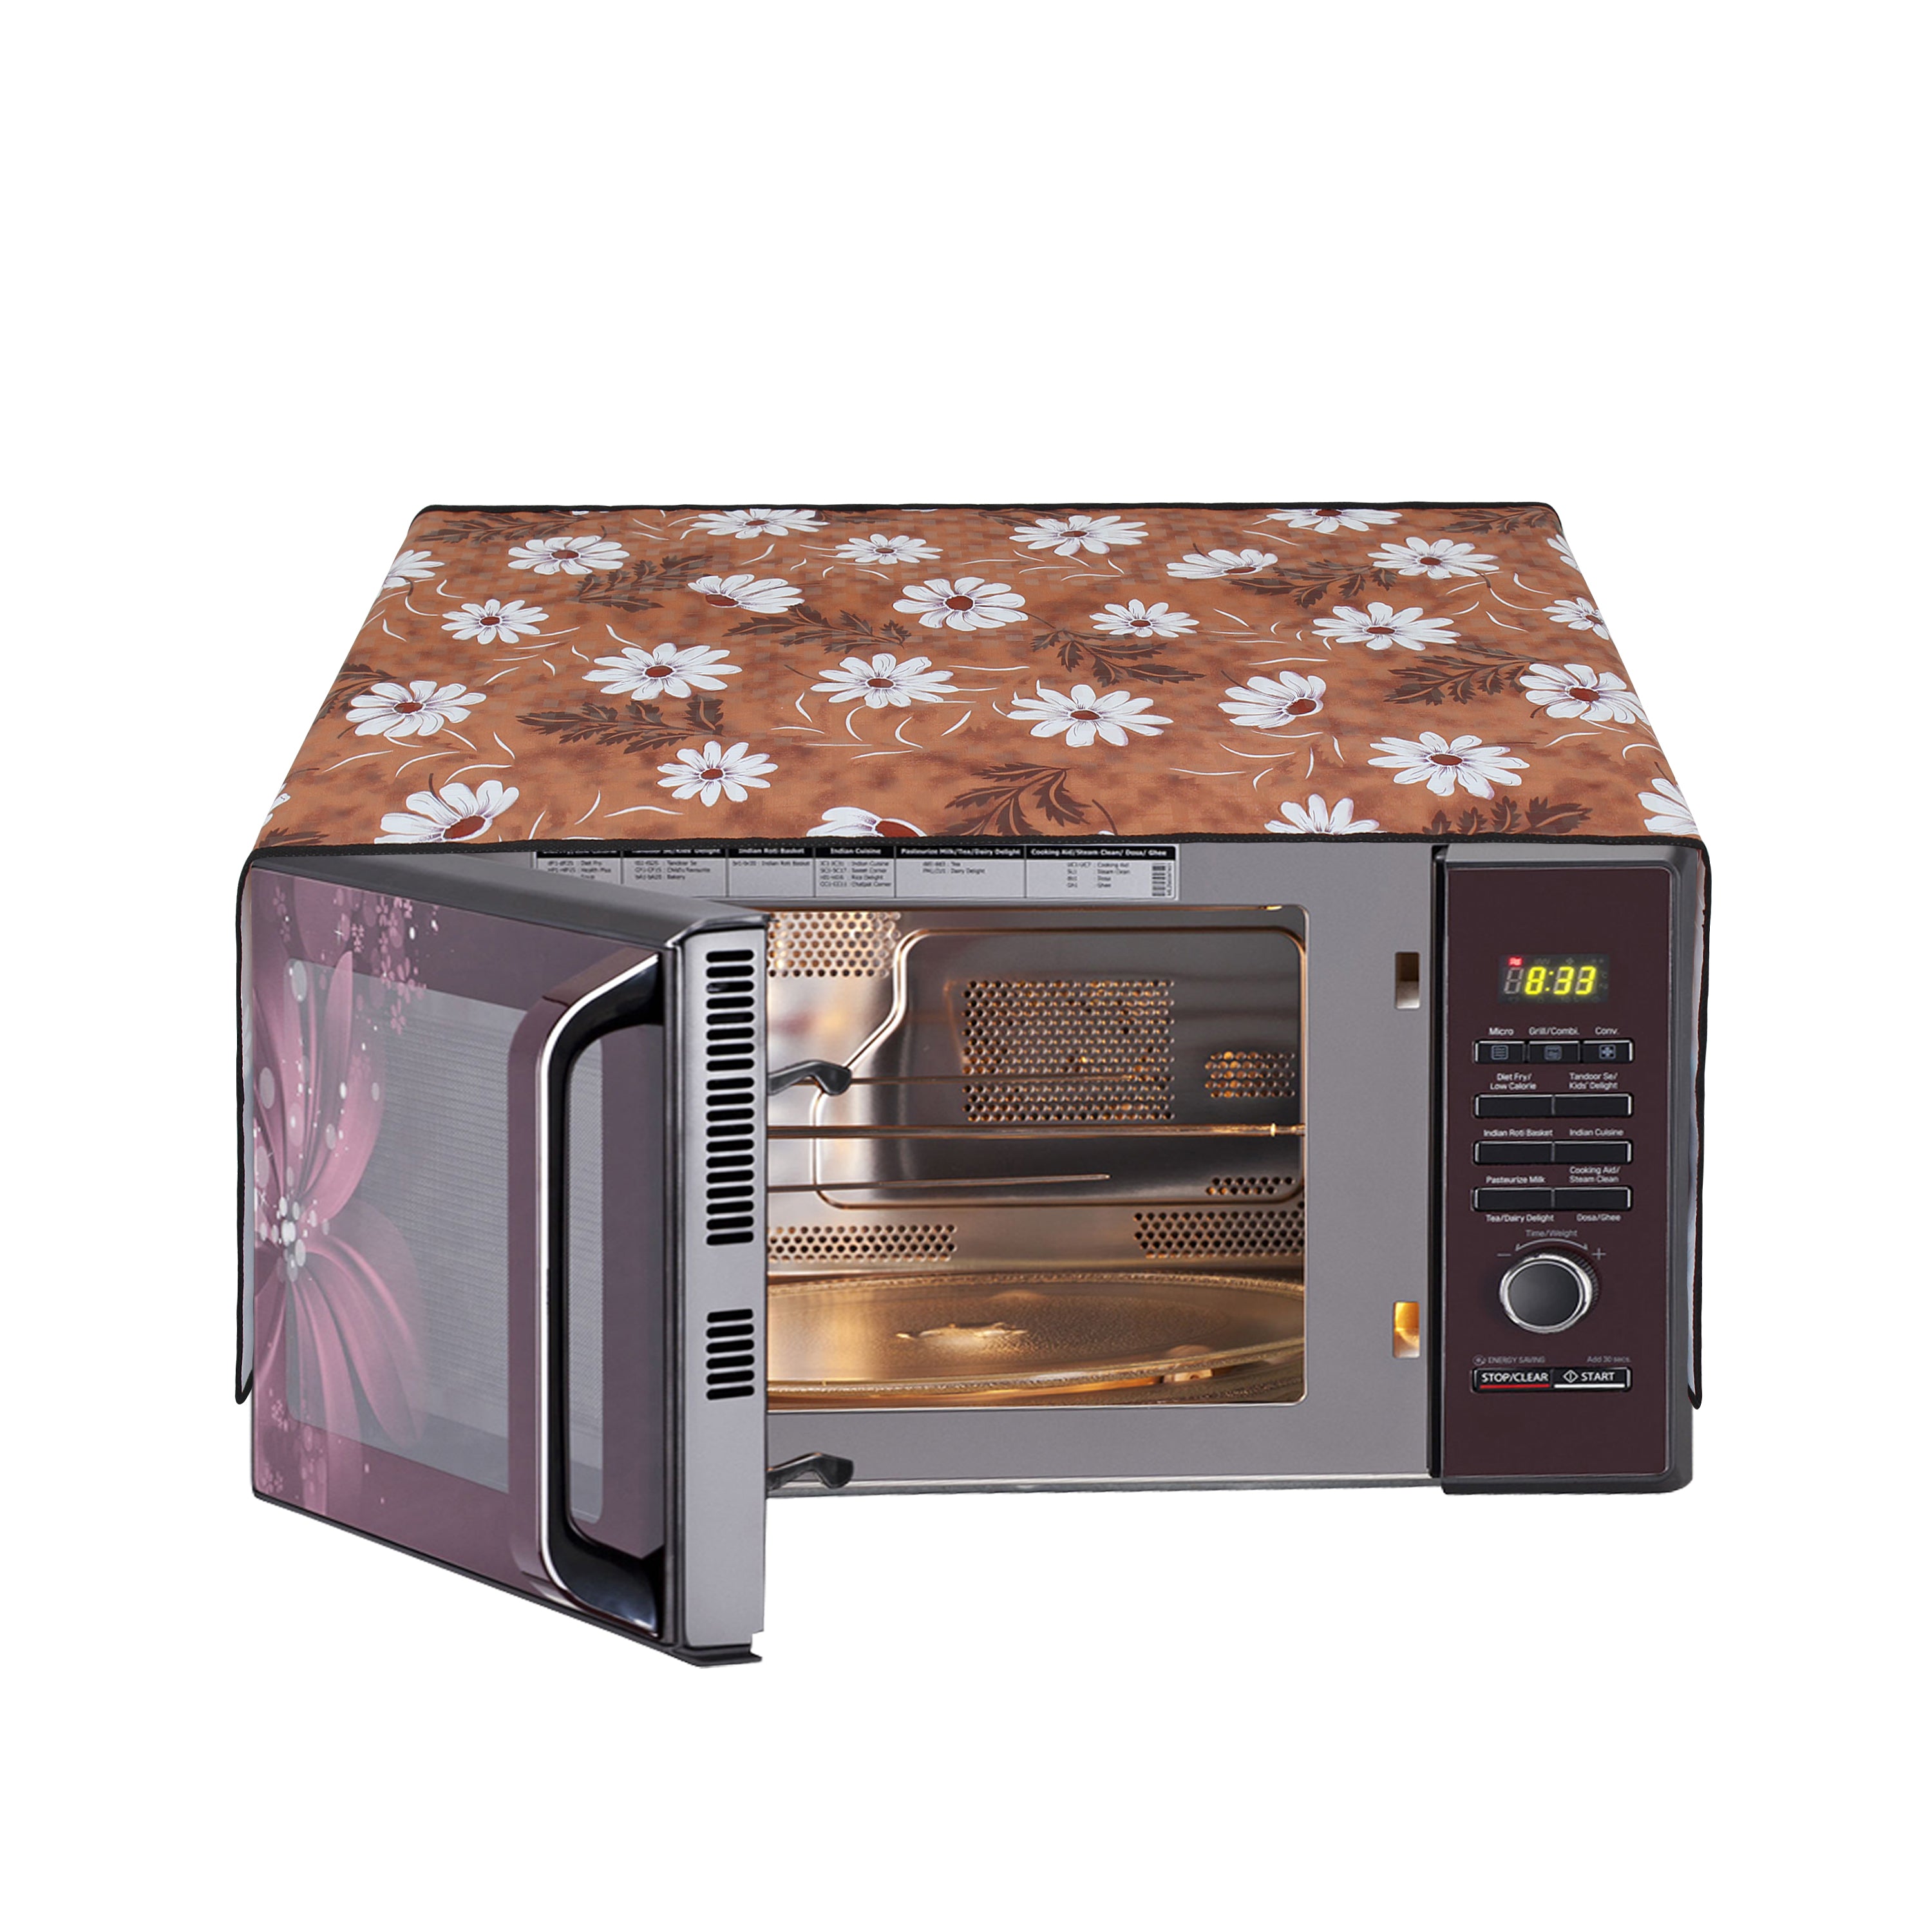 Microwave Oven Top Cover With Adjustable, SA49 - Dream Care Furnishings Private Limited